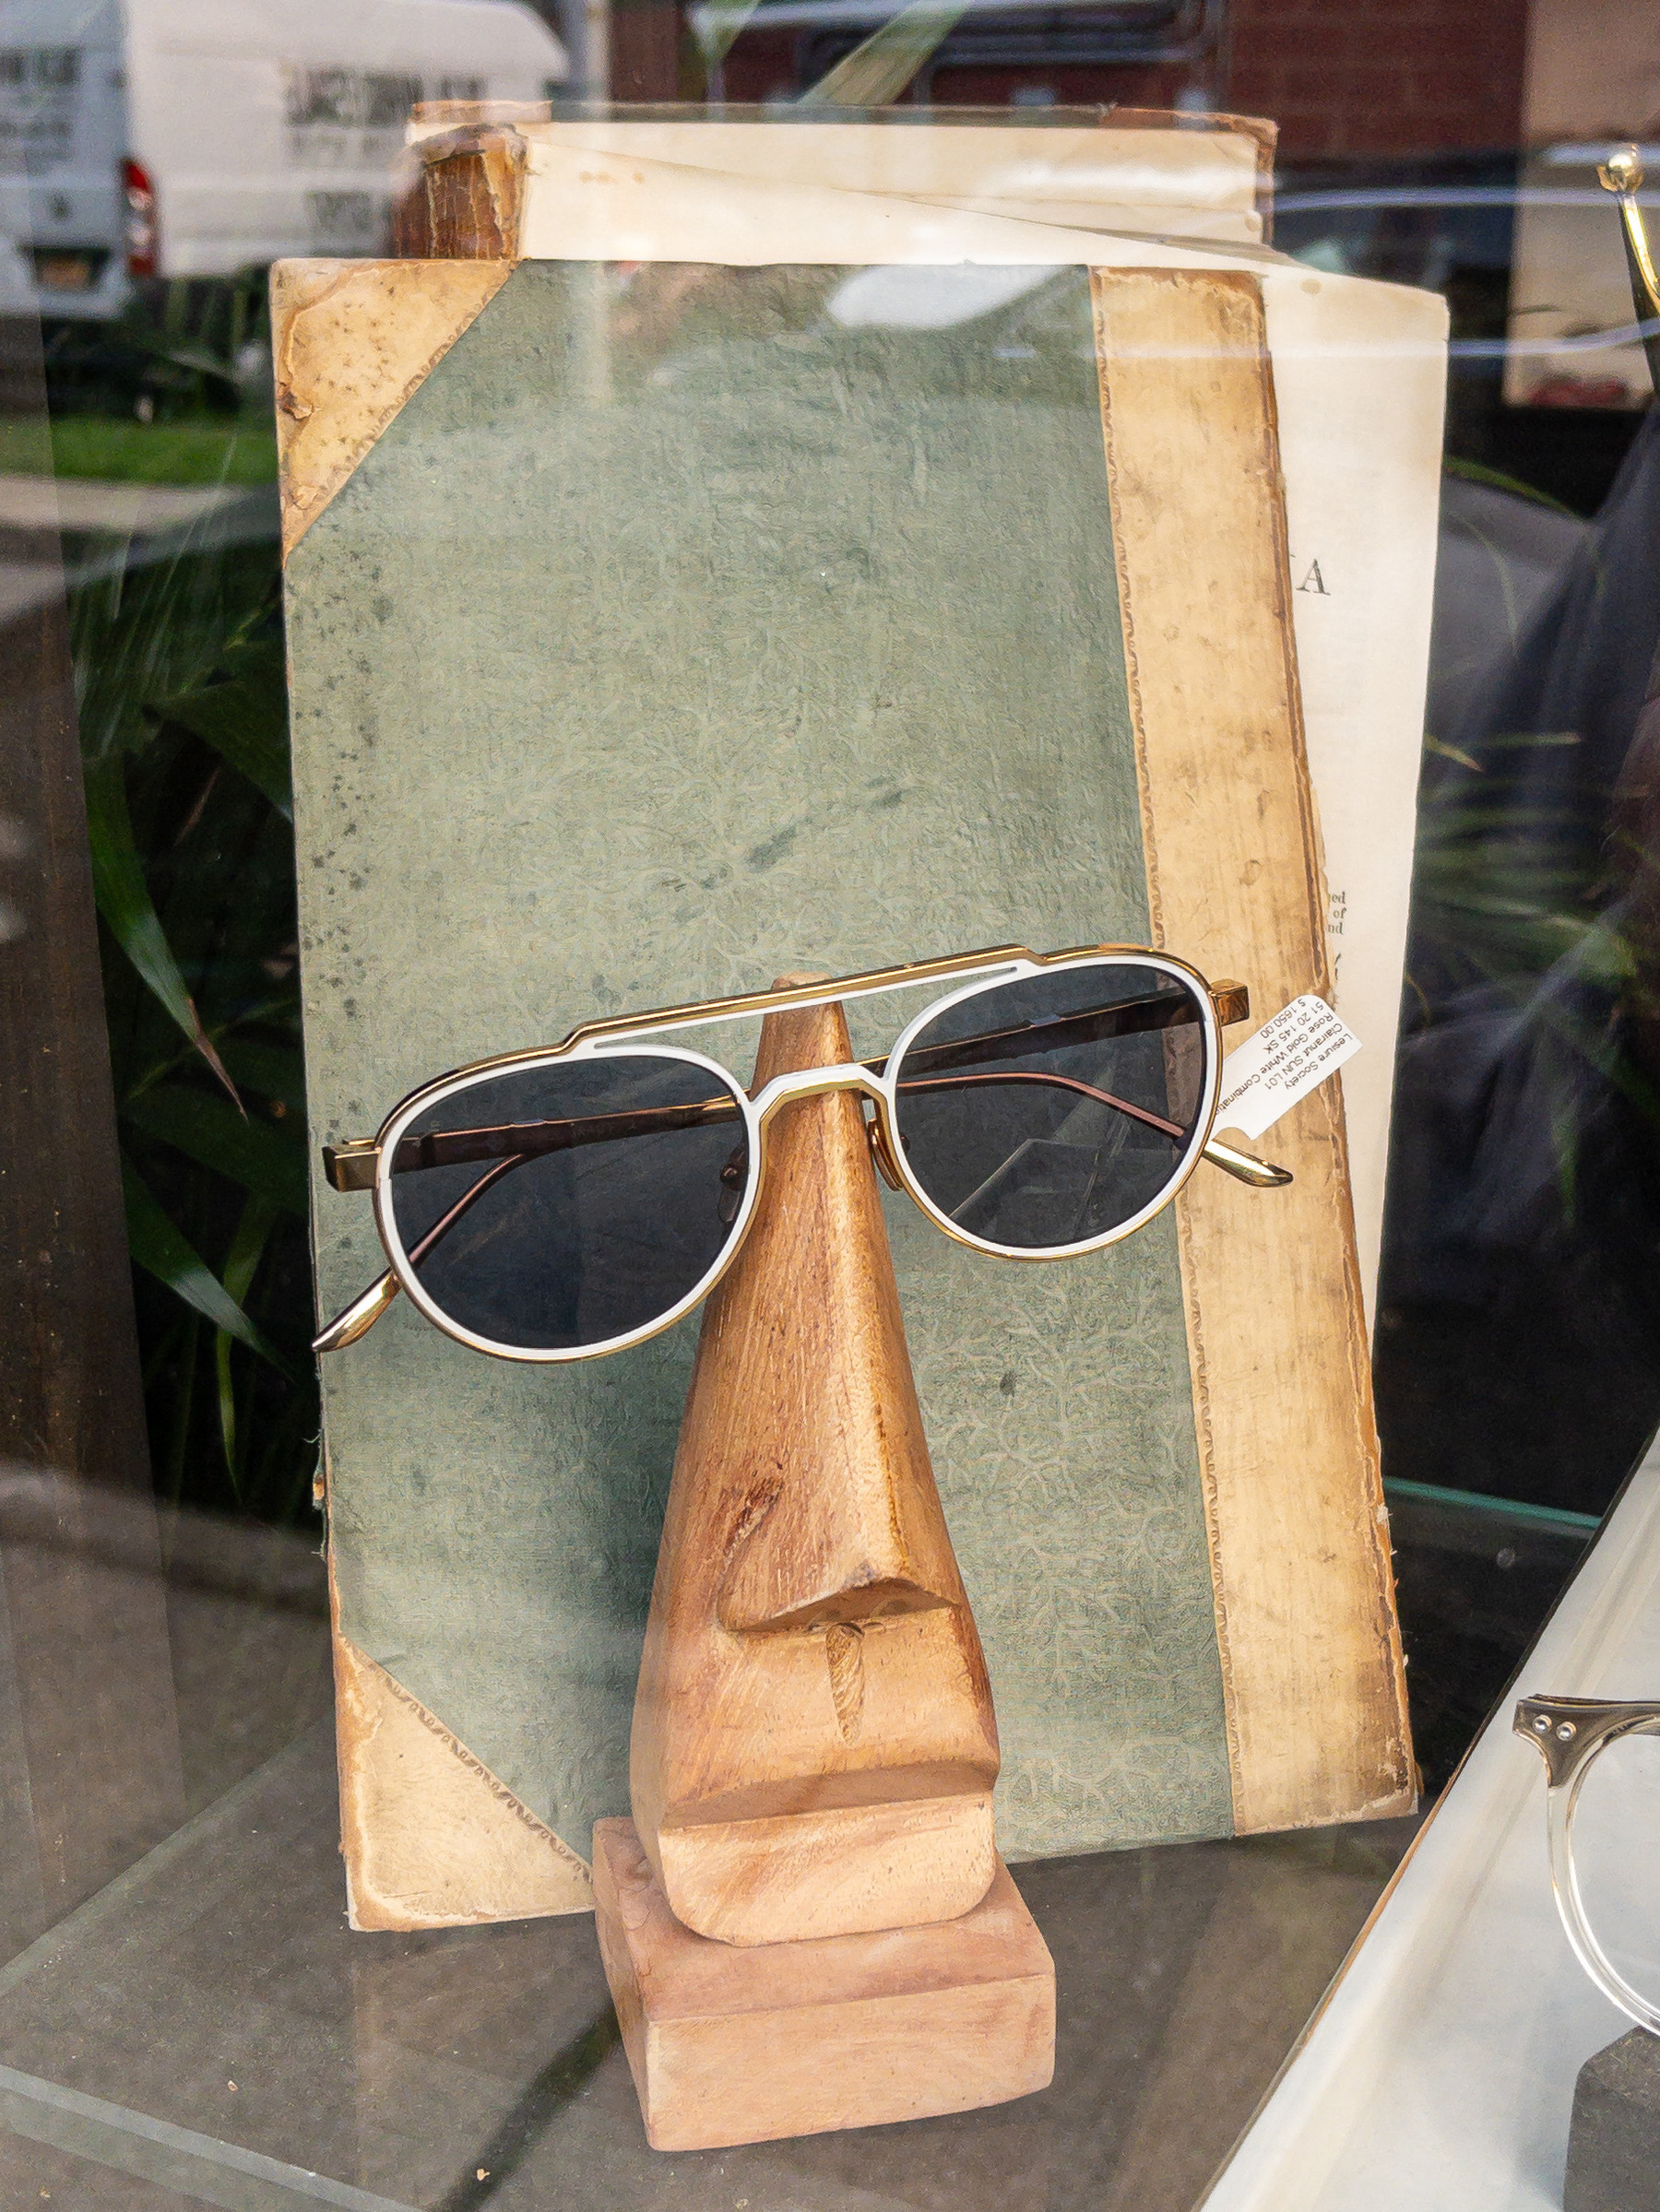 Face made of an old book, sunglasses, wooden nose sculpture, in a shop window.